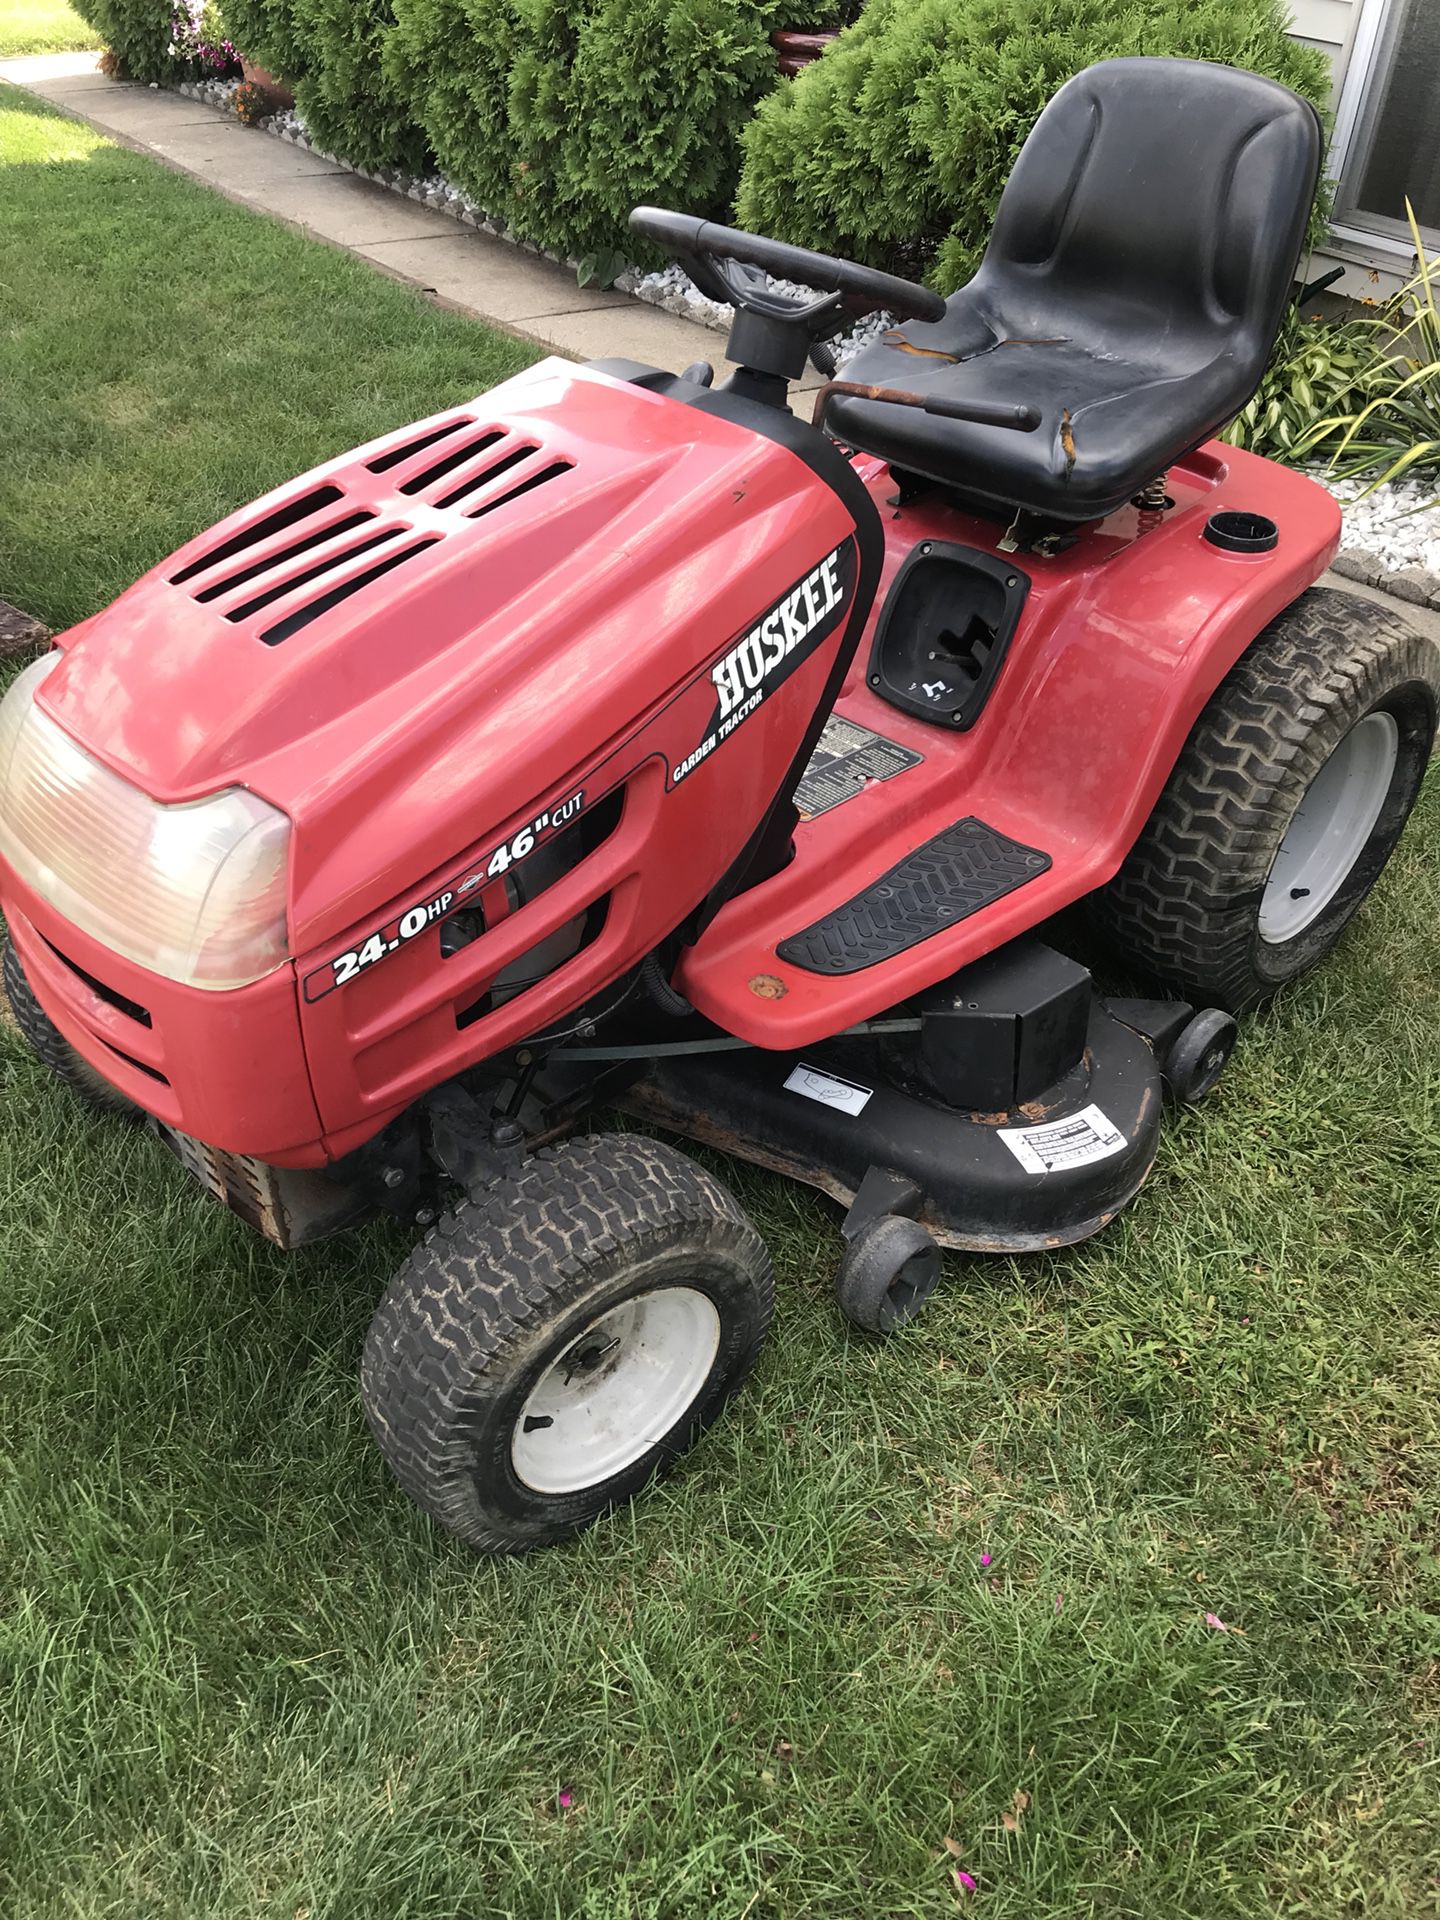 Huskee riding mower. 24 hp brigss engine.46 Inc deck.one owner mower only 420 hours work runs like new